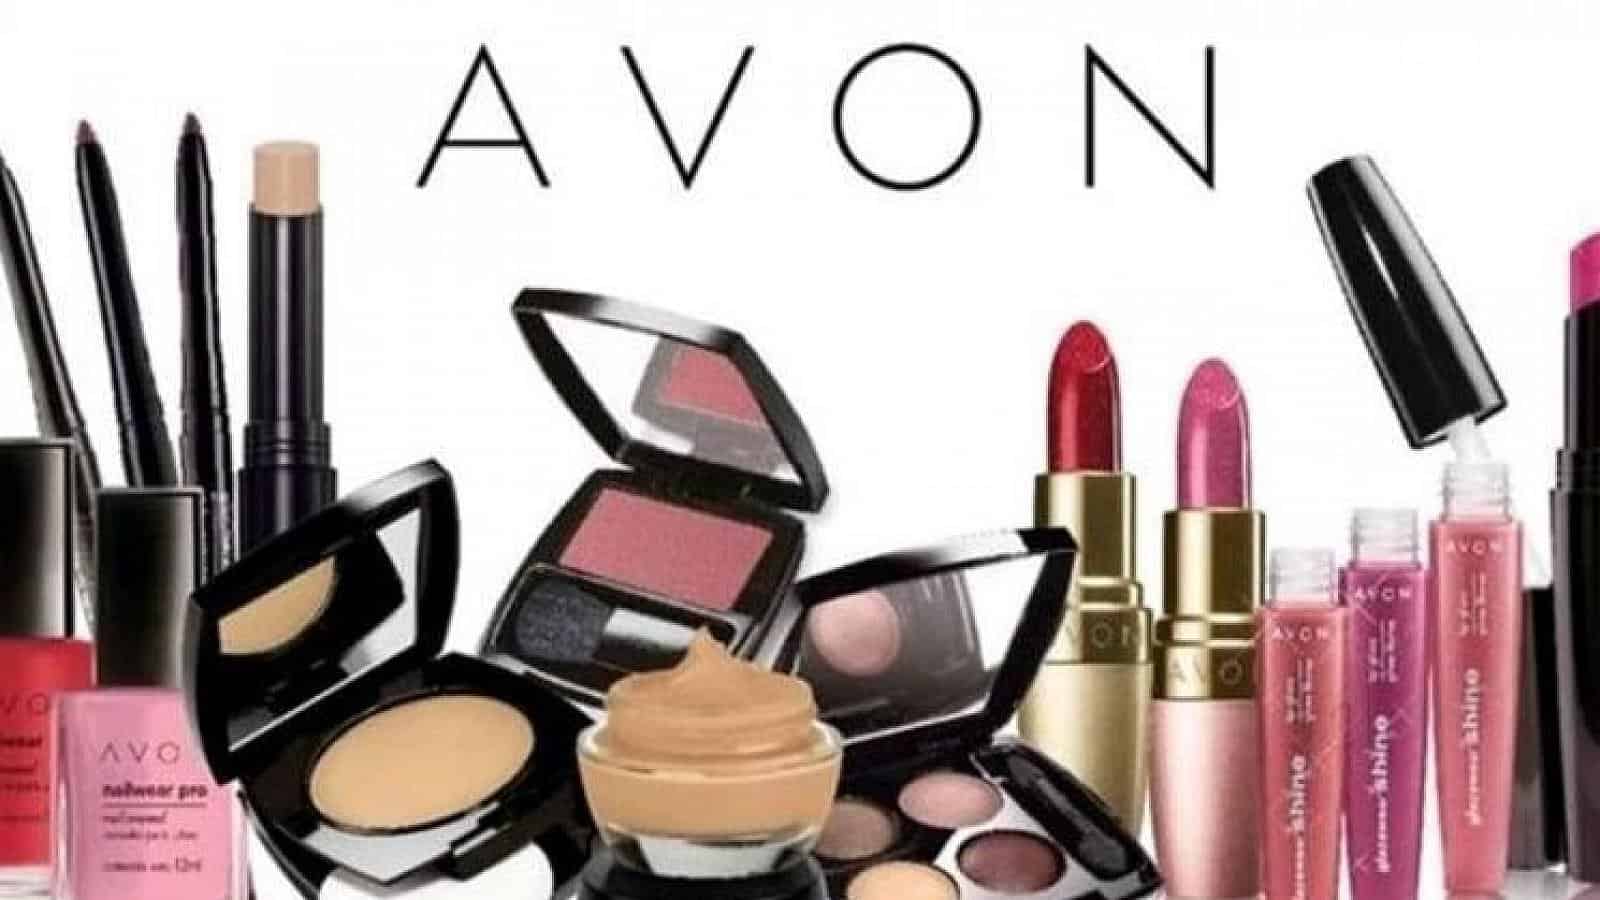 Avon to shed 2,400 jobs globally